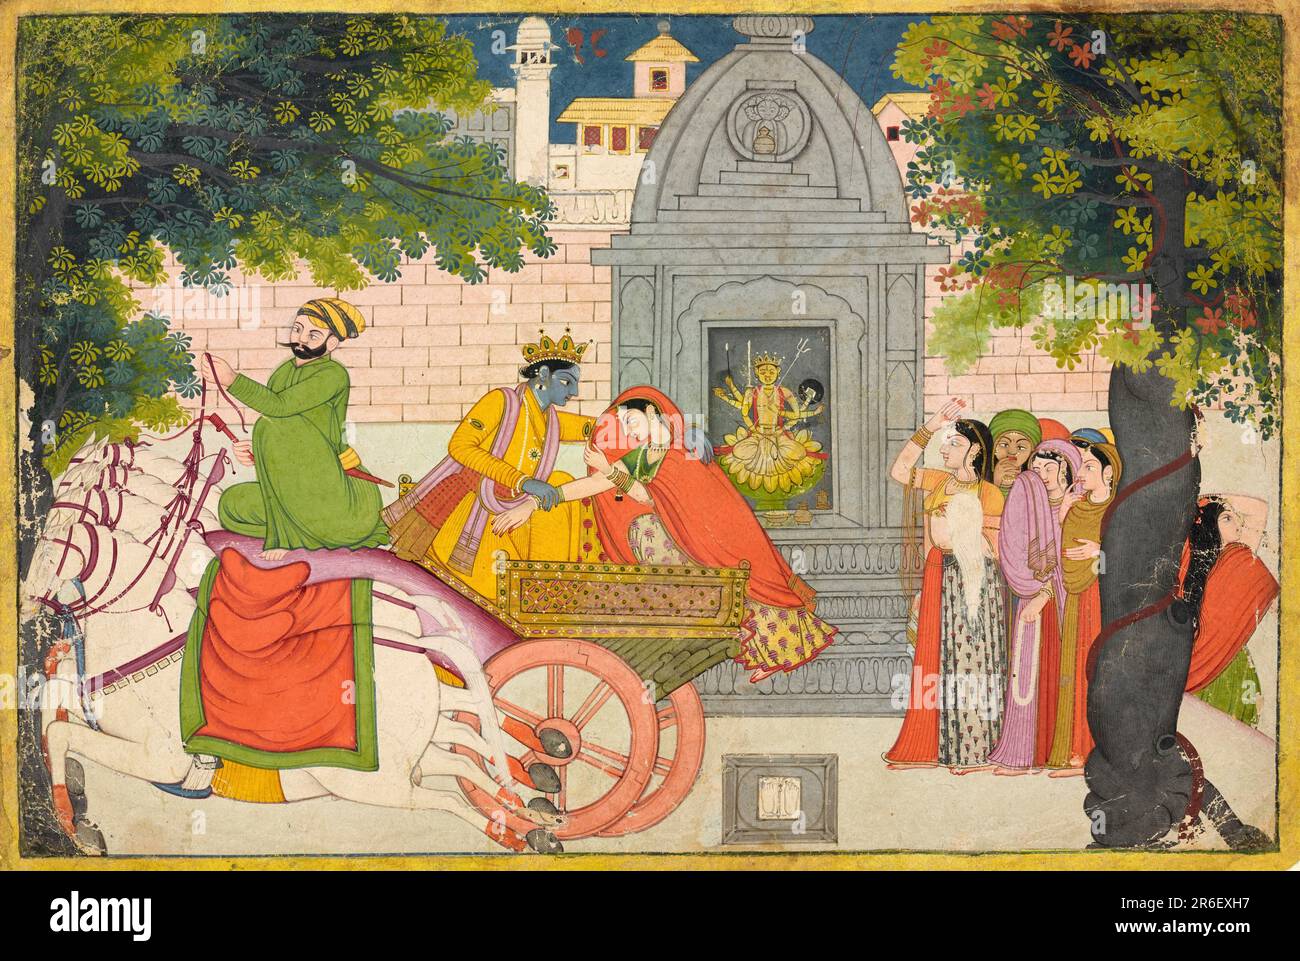 Rukmini elopes with Krishna, folio from a Bhagavata Purana. Date: ca. 1780. Opaque watercolor and gold on paper. Origin: Garhwal, Uttarakhand state, India. Museum: Freer Gallery of Art and Arthur M. Sackler Gallery. Stock Photo